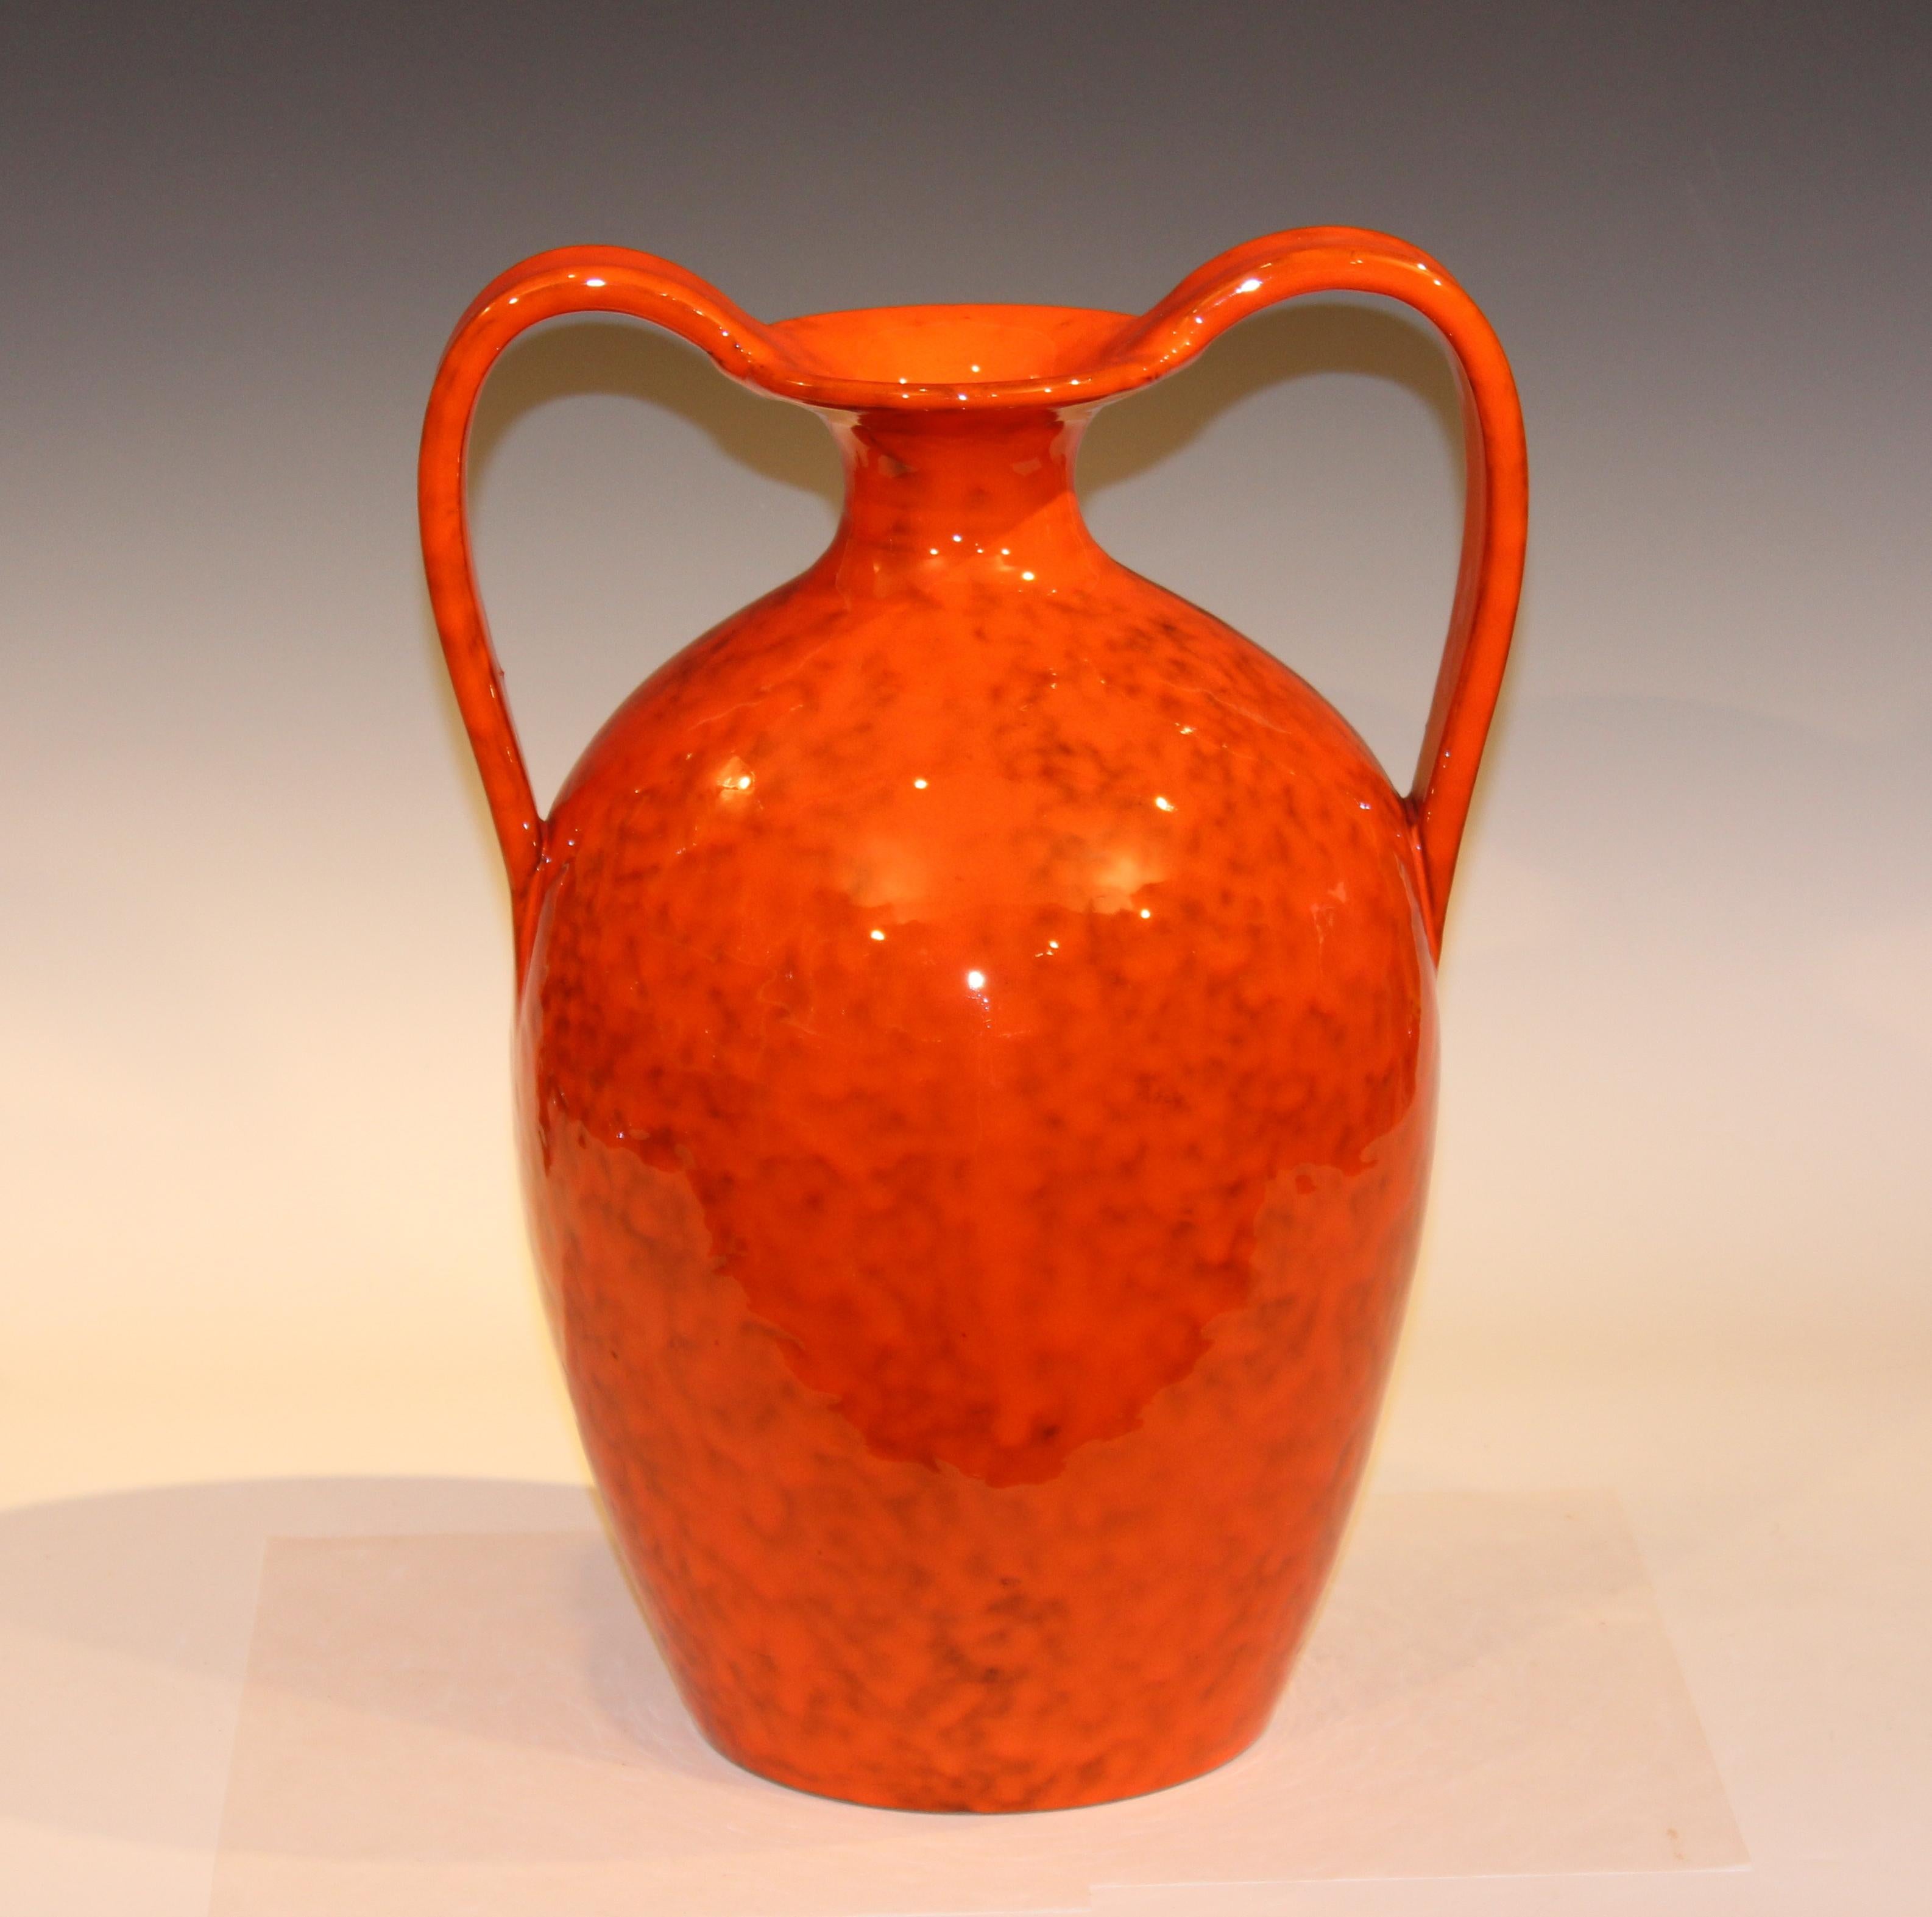 Vintage Italian Pottery Bright Atomic Orange Italica Ars Rosenthal-Netter Vase In Excellent Condition For Sale In Wilton, CT